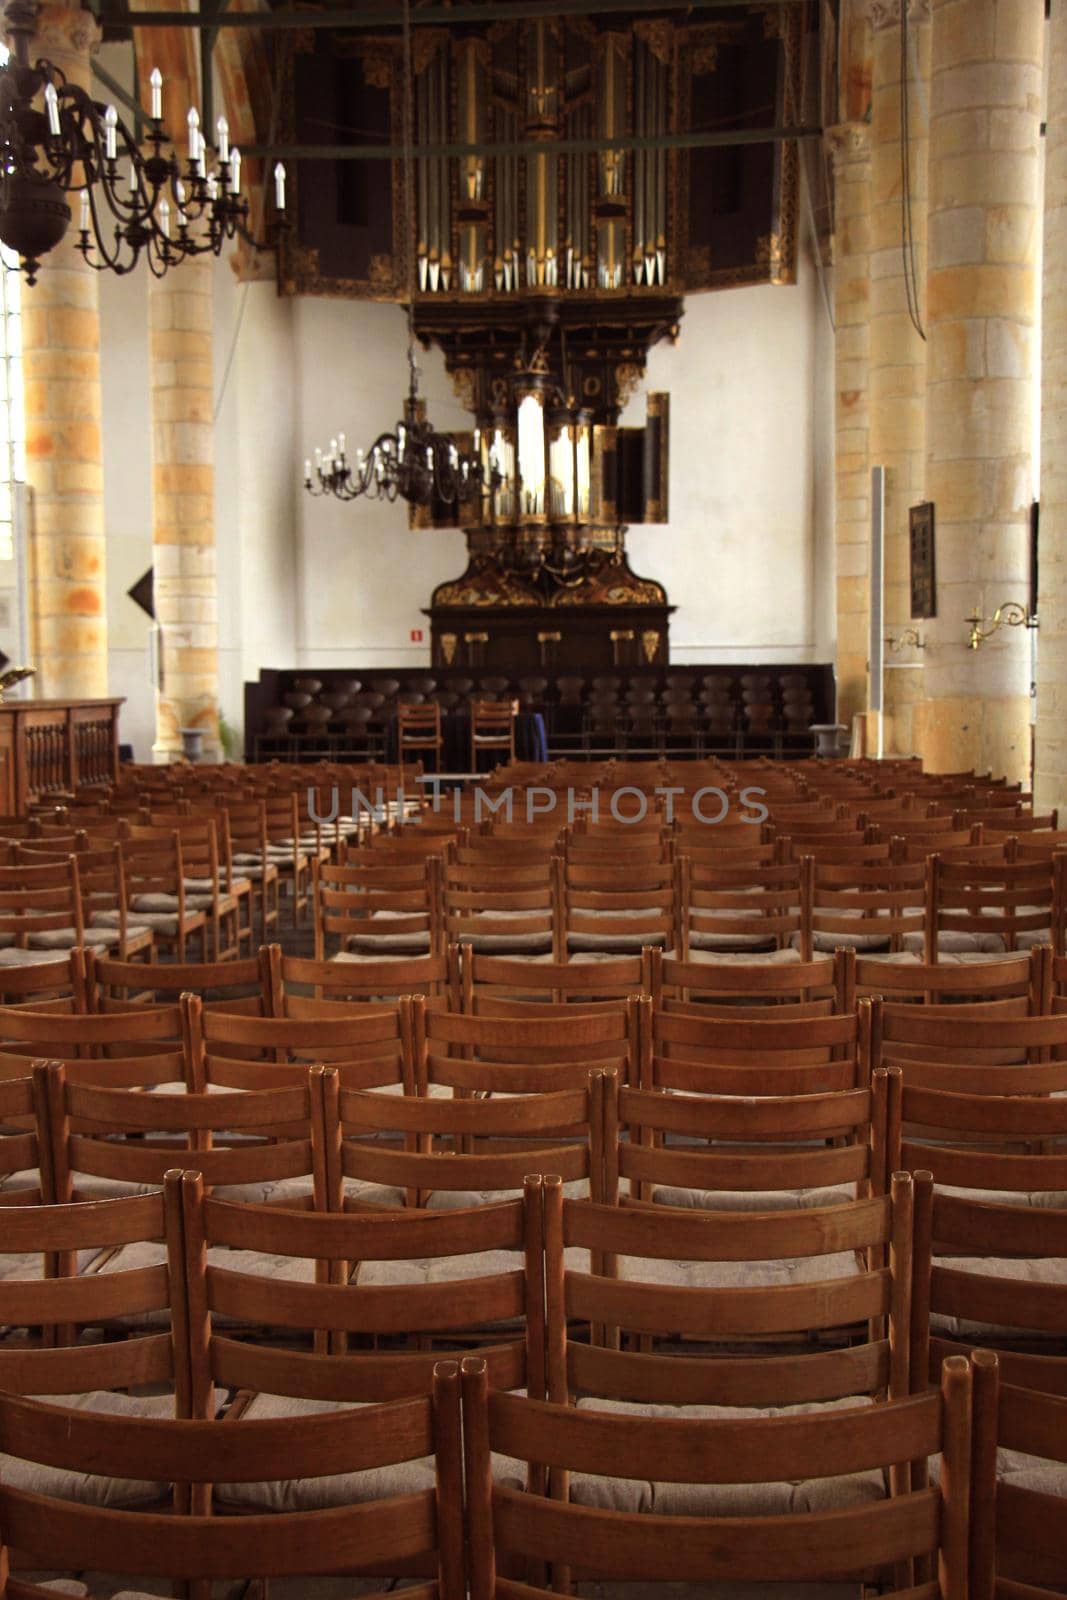 Simple wooden chairs in a Dutch Reformed Church